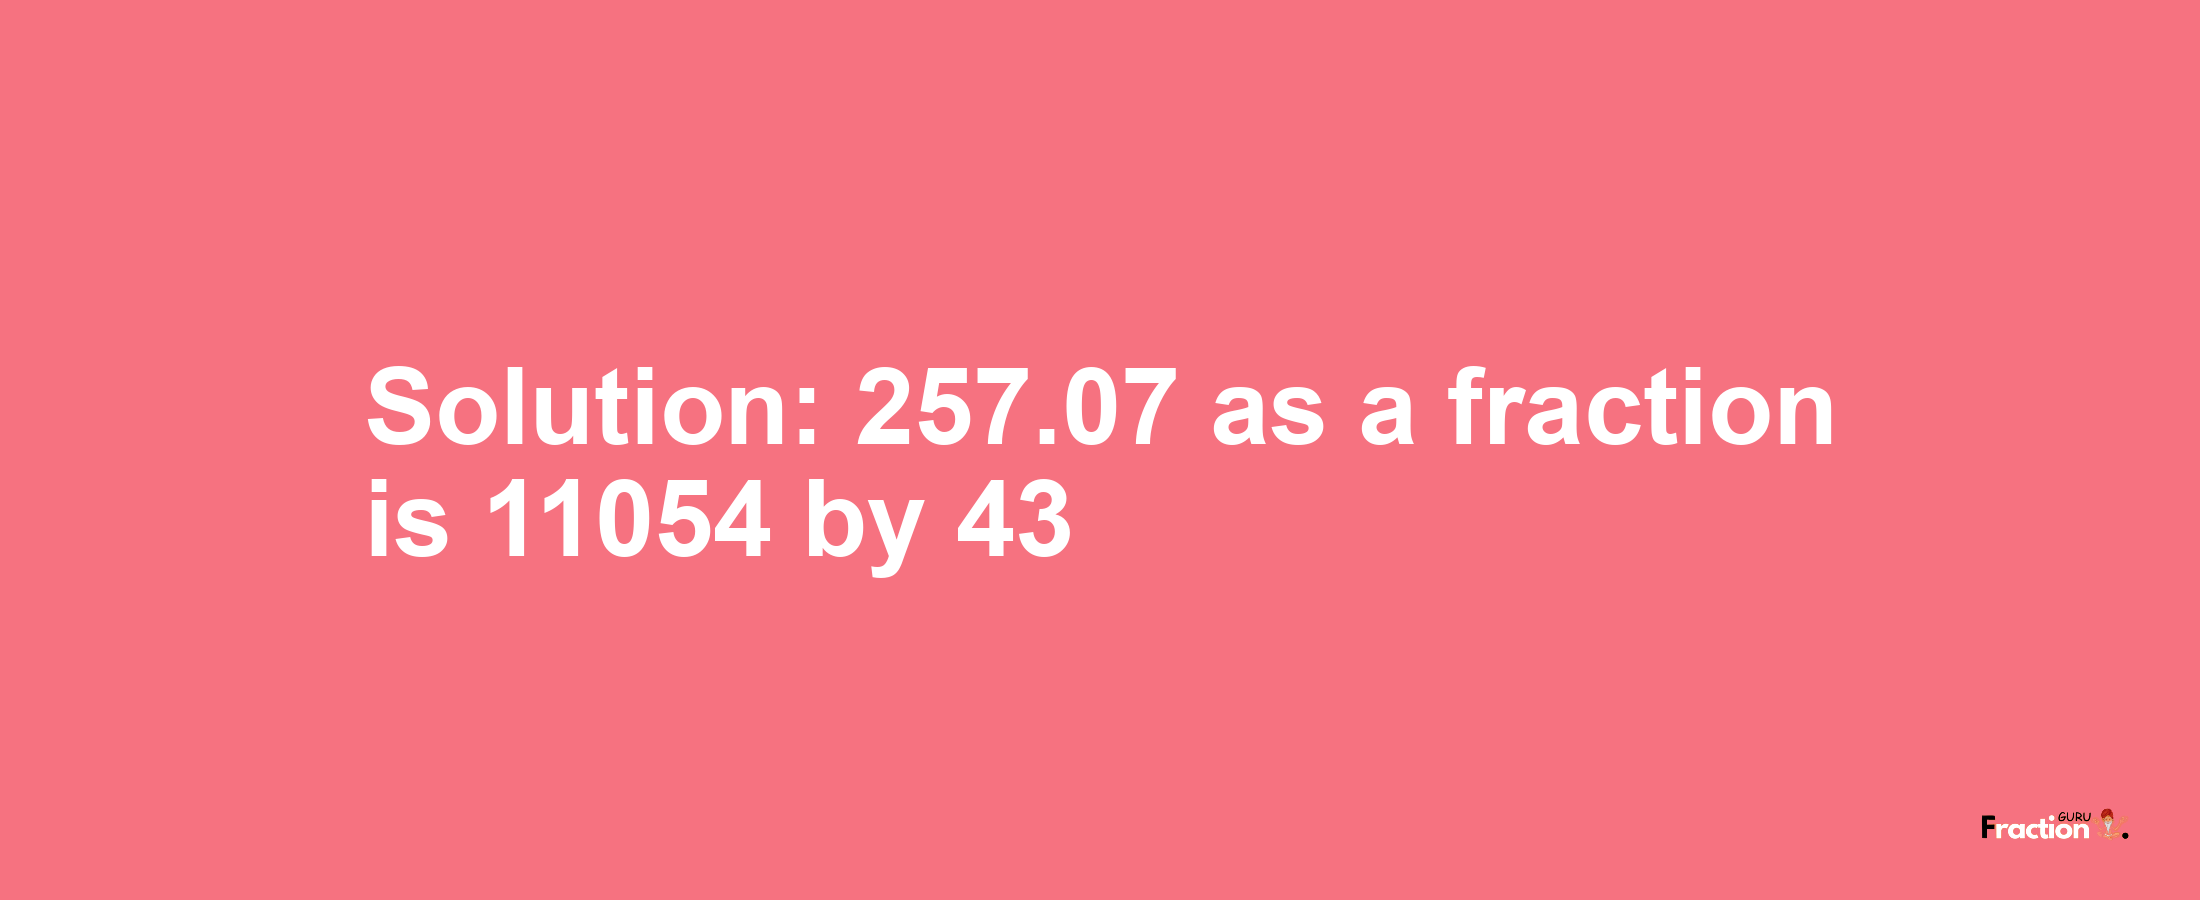 Solution:257.07 as a fraction is 11054/43